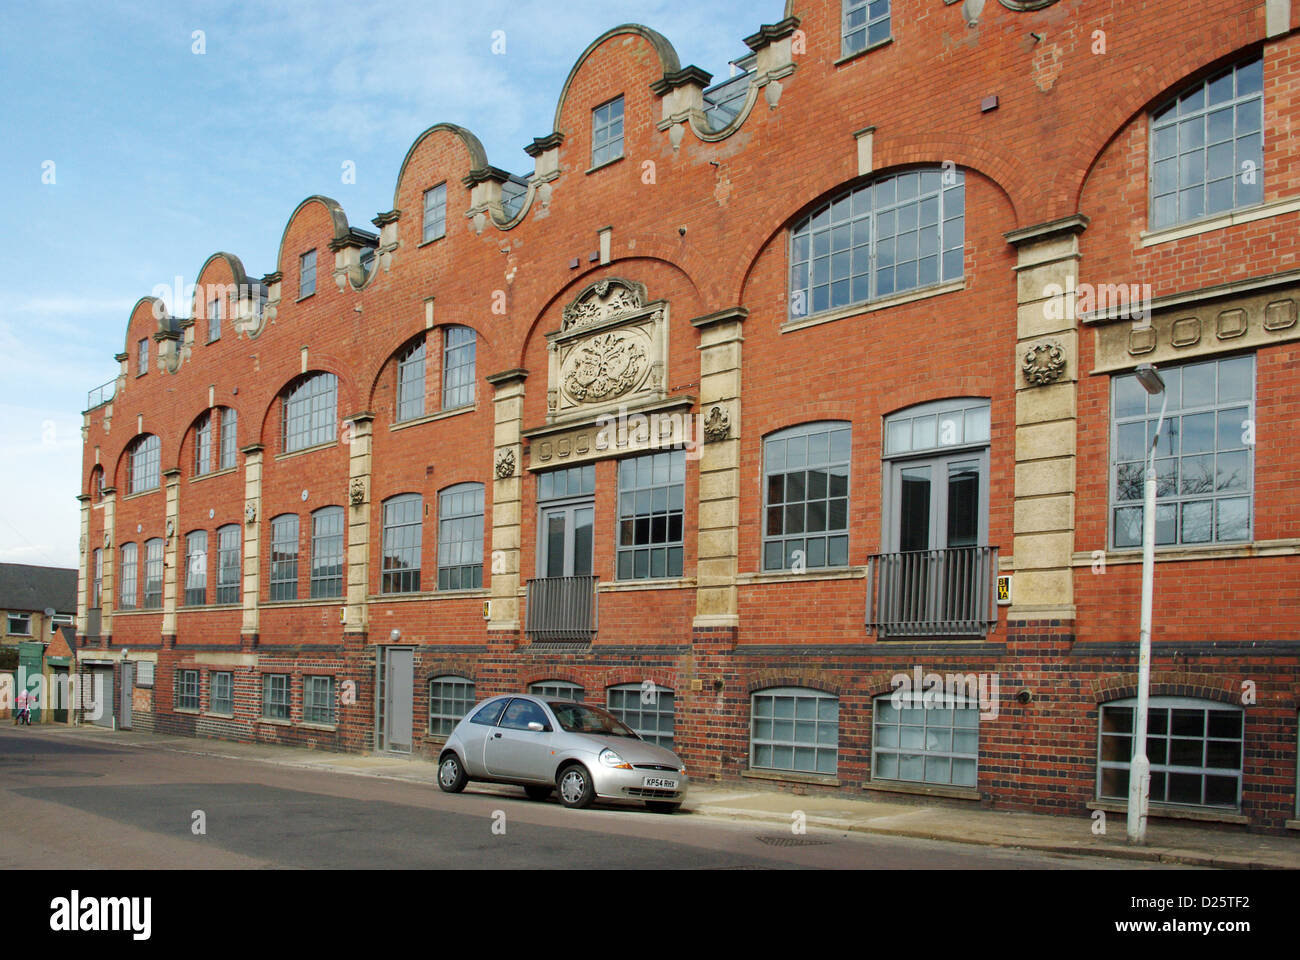 Webbs Shoes, Northampton; an old factory now turned into residential apartments Stock Photo